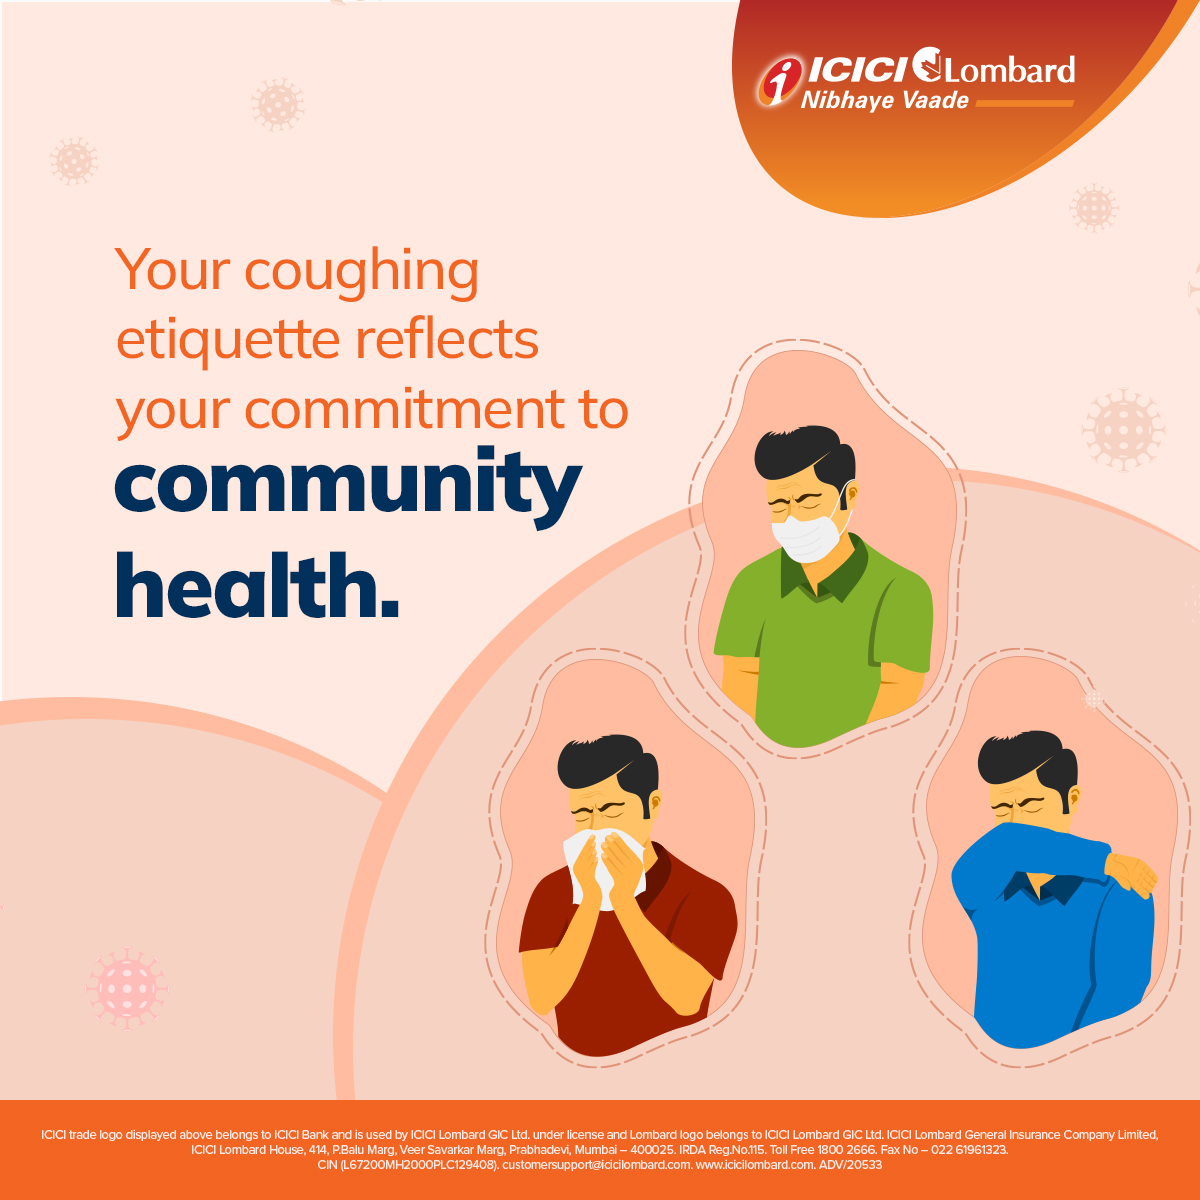 By covering your coughs and sneezes, you're not just being polite but actively contributing to the containment of illness. Keep sanitizing your hands during a cold. #ICICILombard #NibhayeVaade #CovidSafety